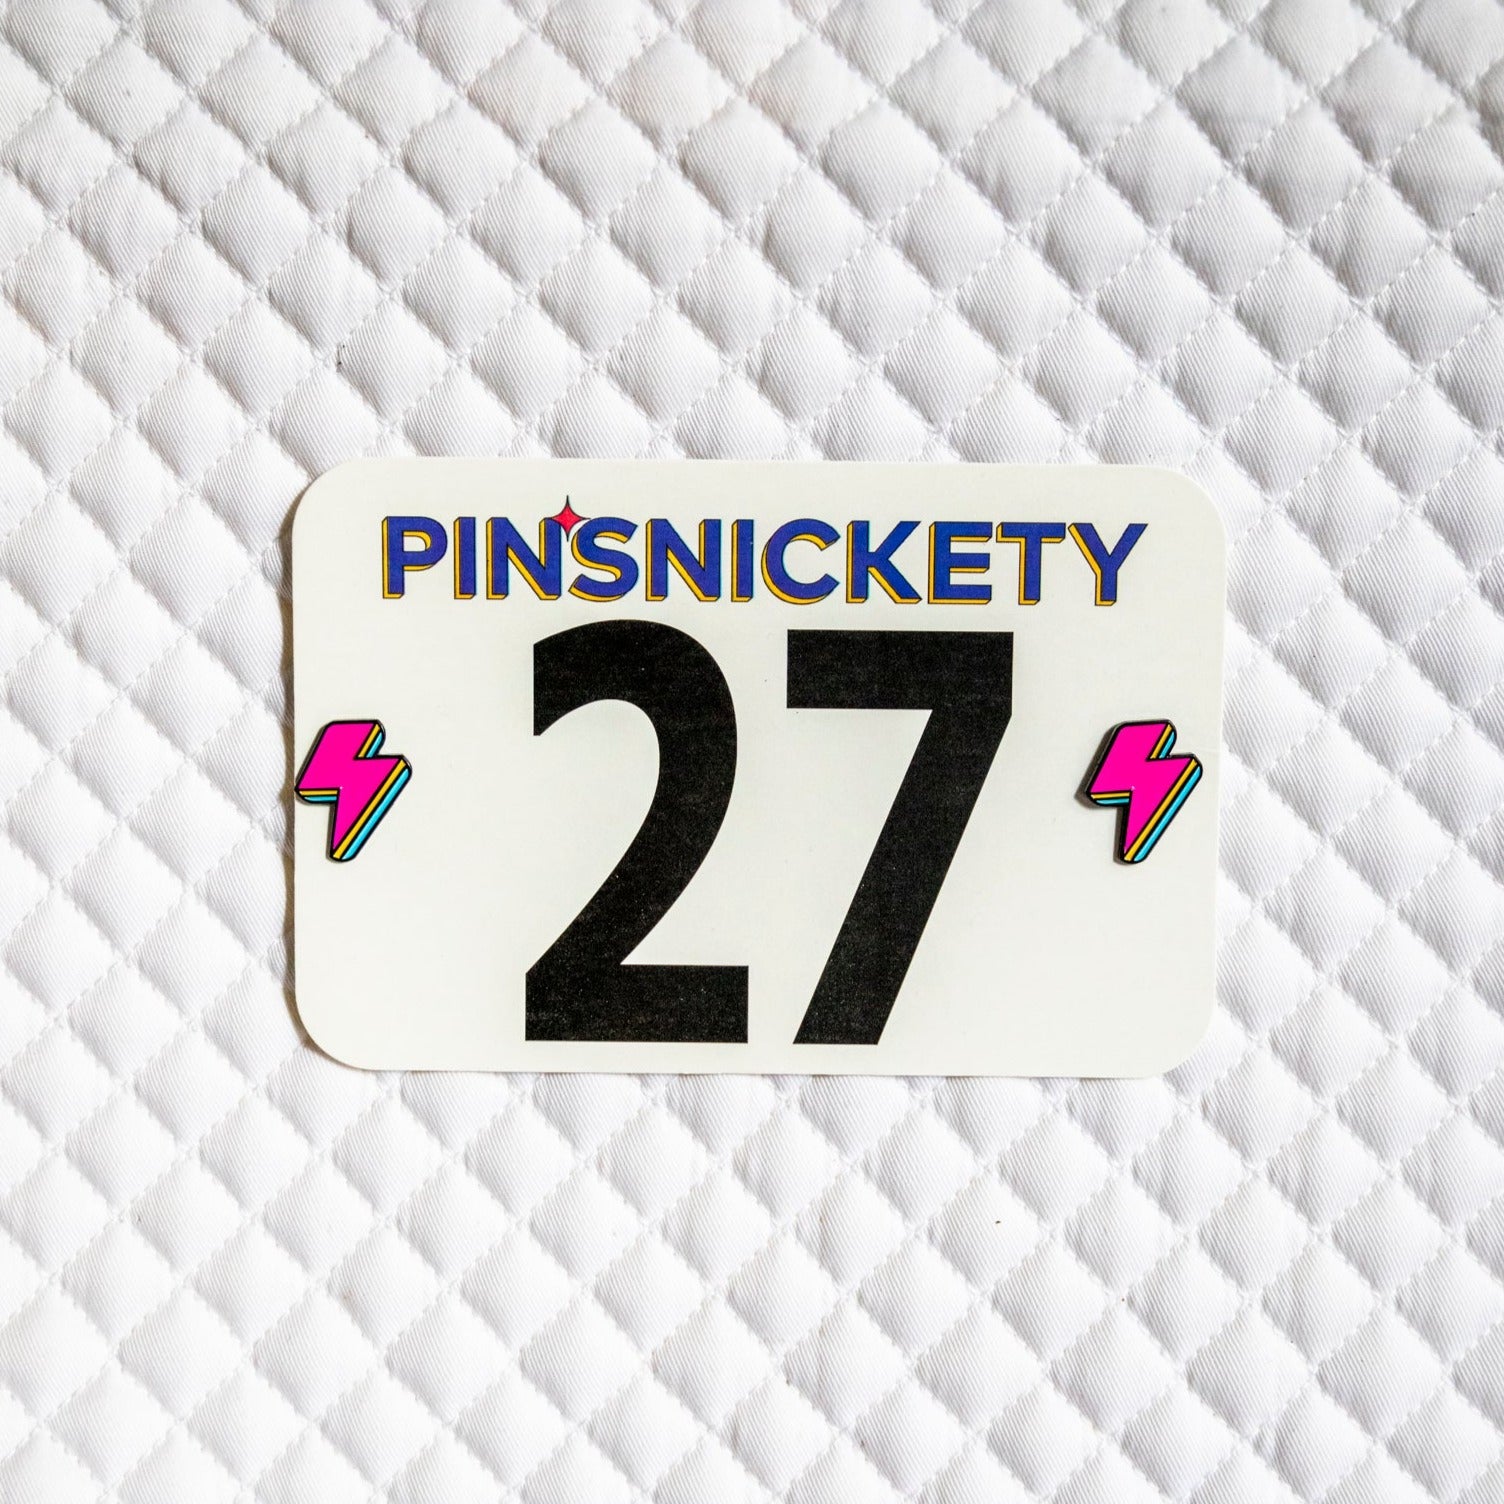 Pinsnickety Lightning Bolt horse show number pins on a saddle pad.